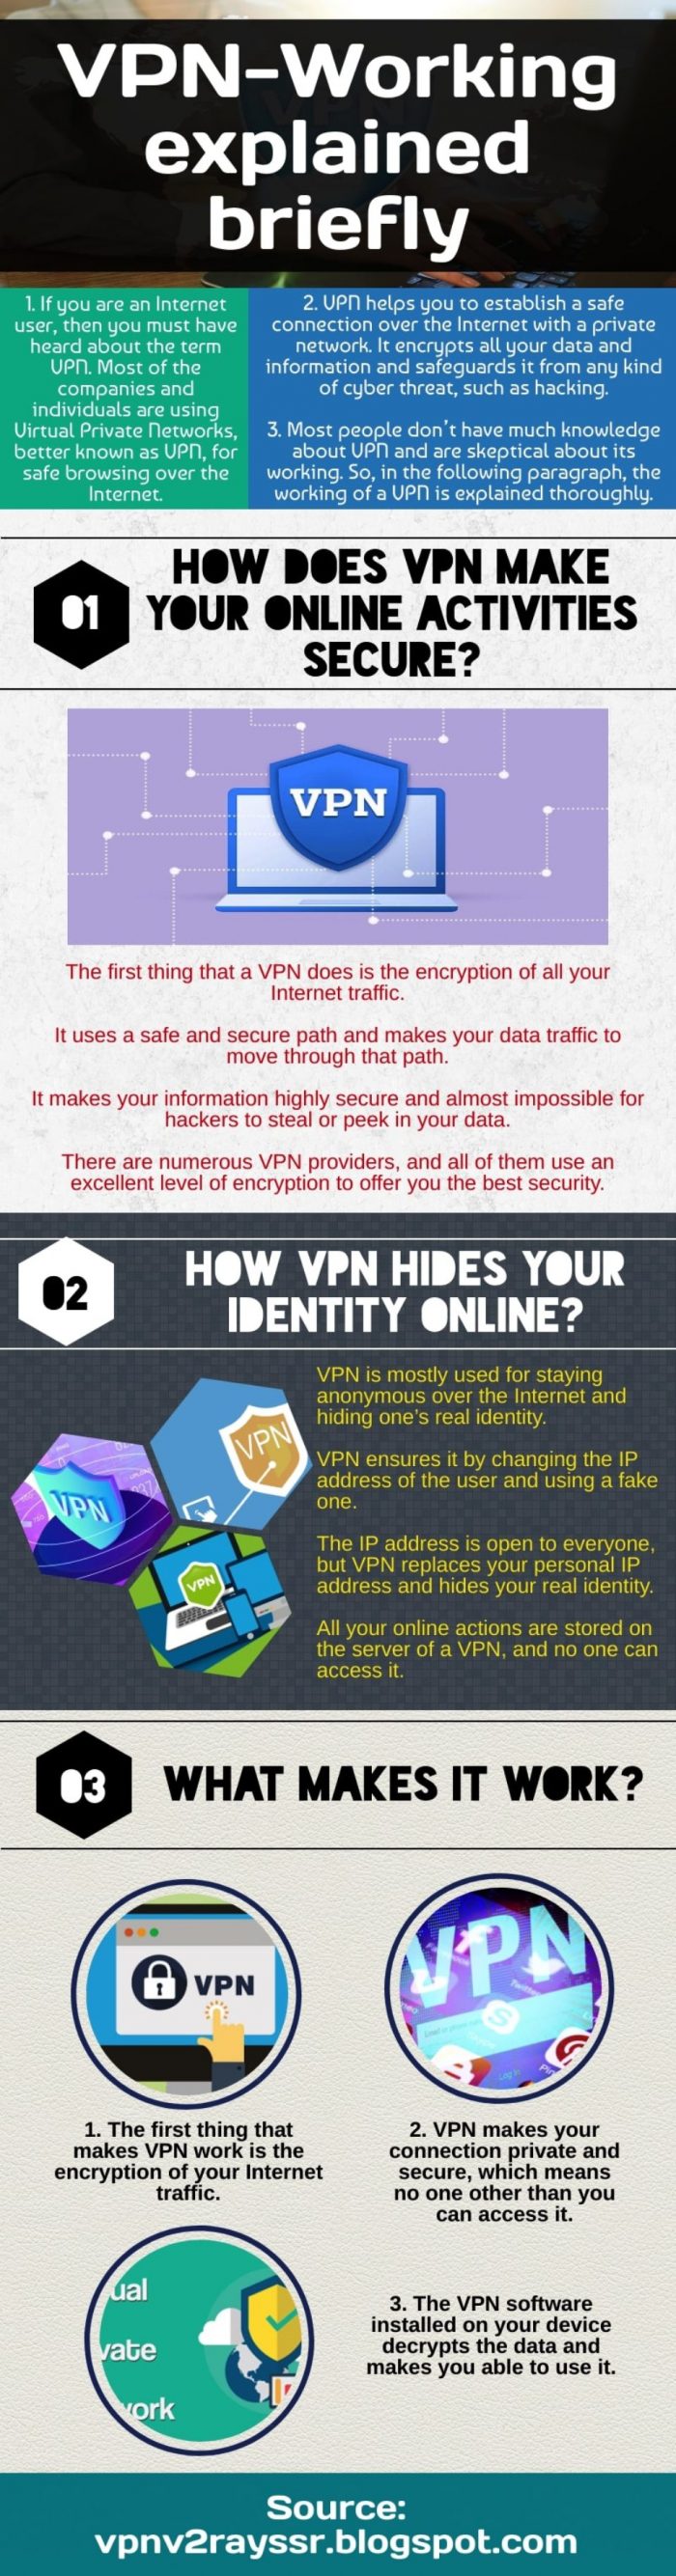 VPN-Private browsing of the internet